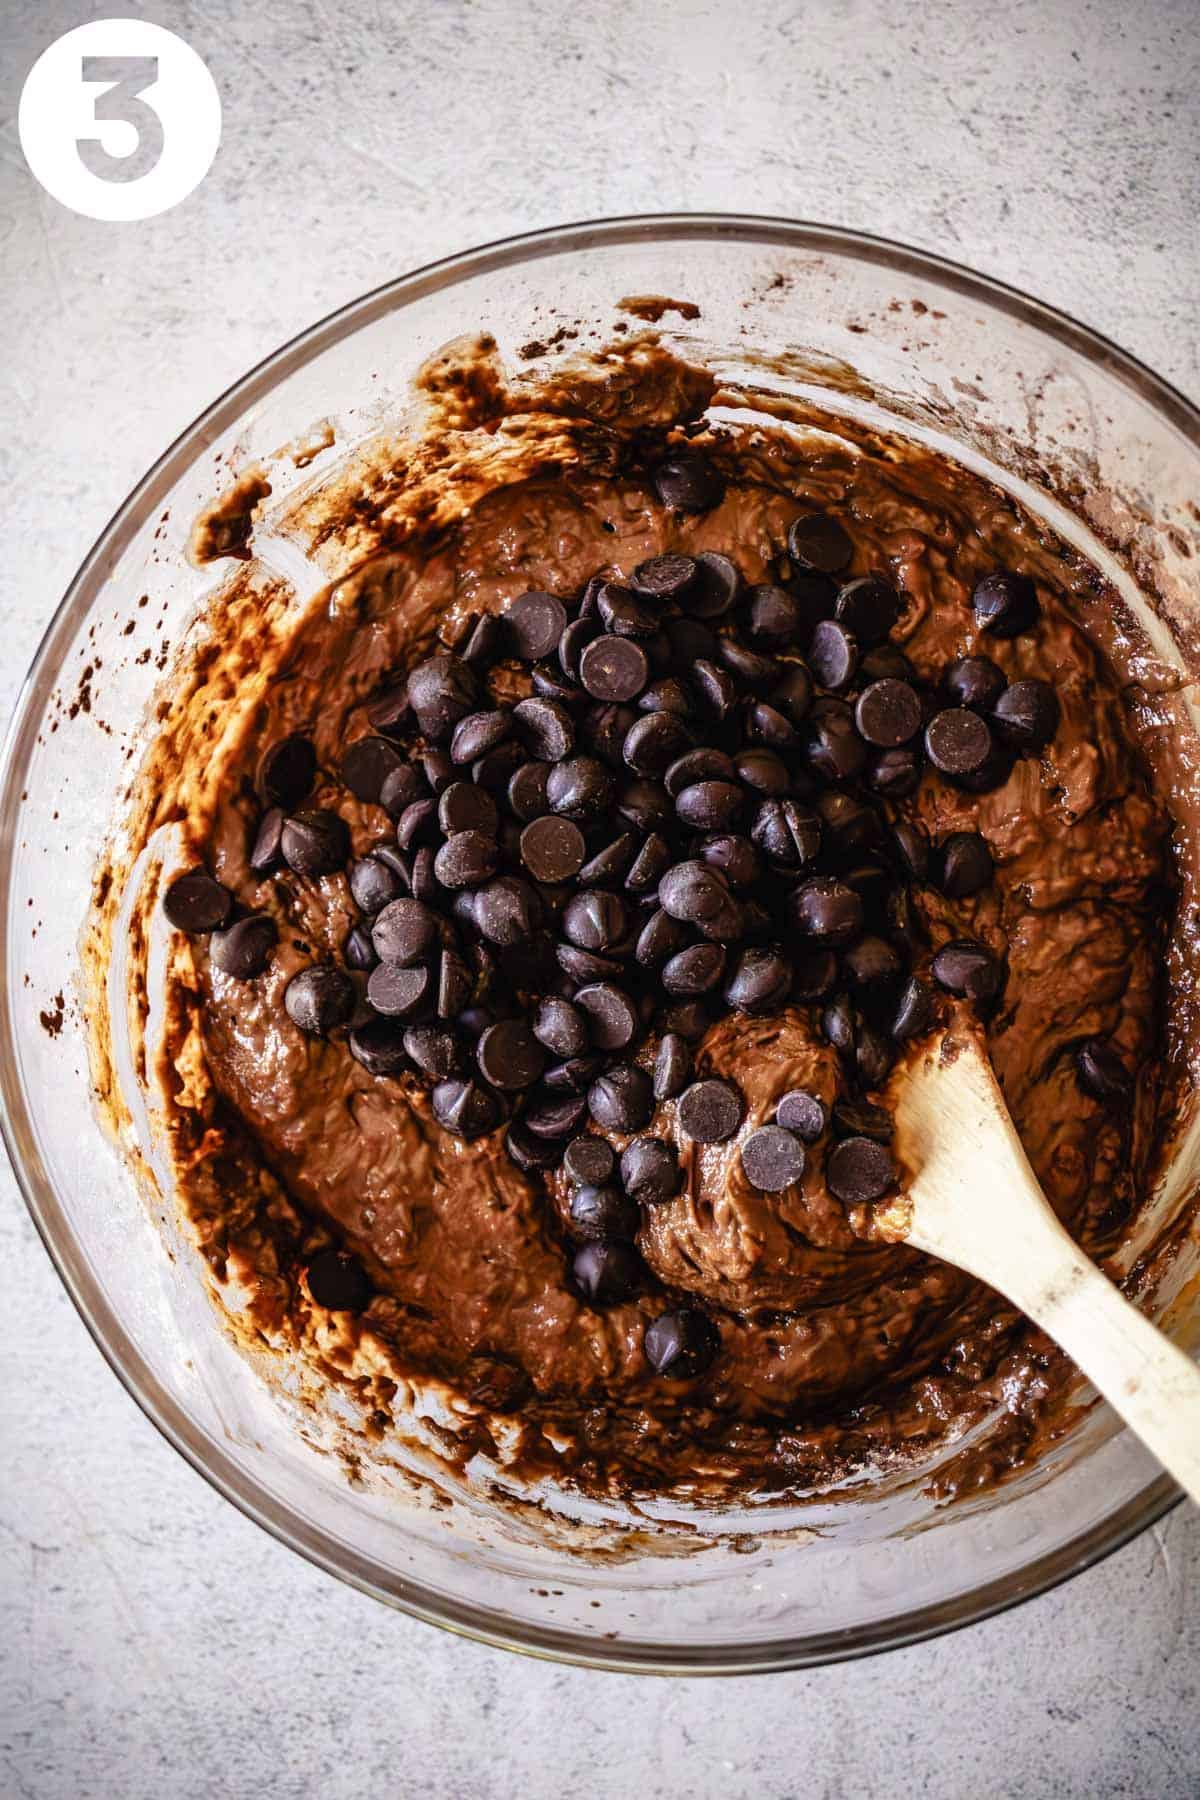 Bowl of chocolate muffin batter with chocolate chips on top.